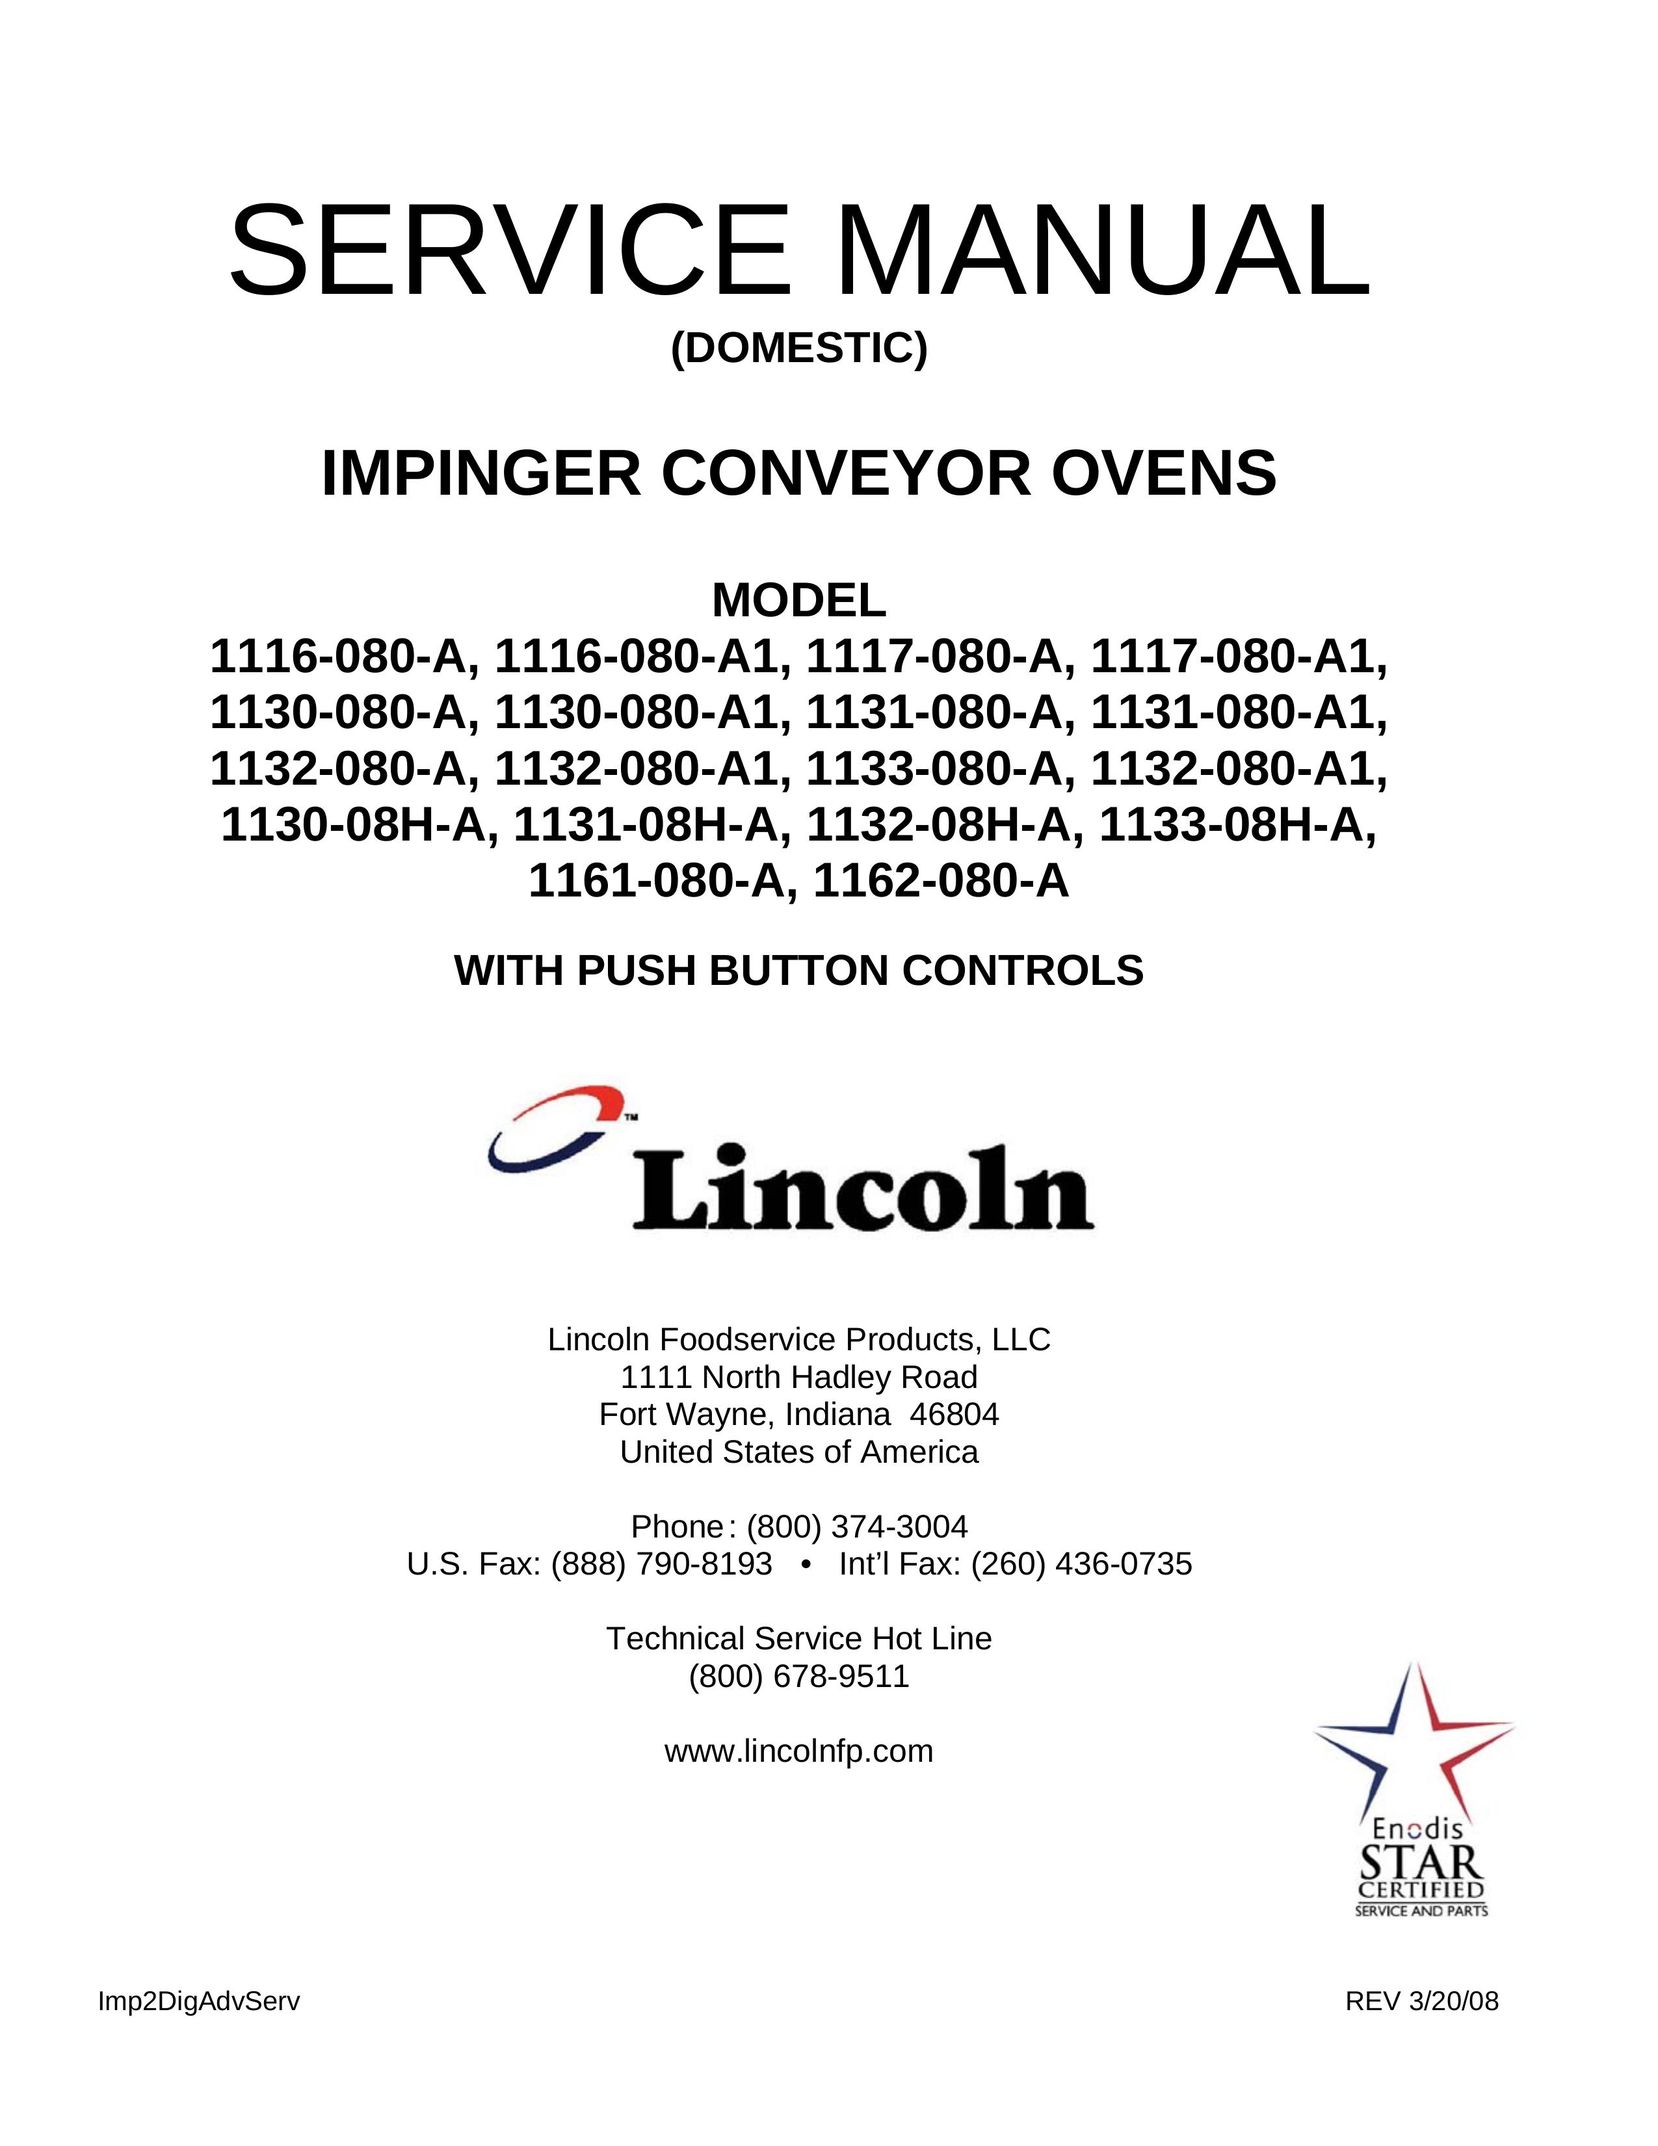 Lincoln 1133-080-A Convection Oven User Manual